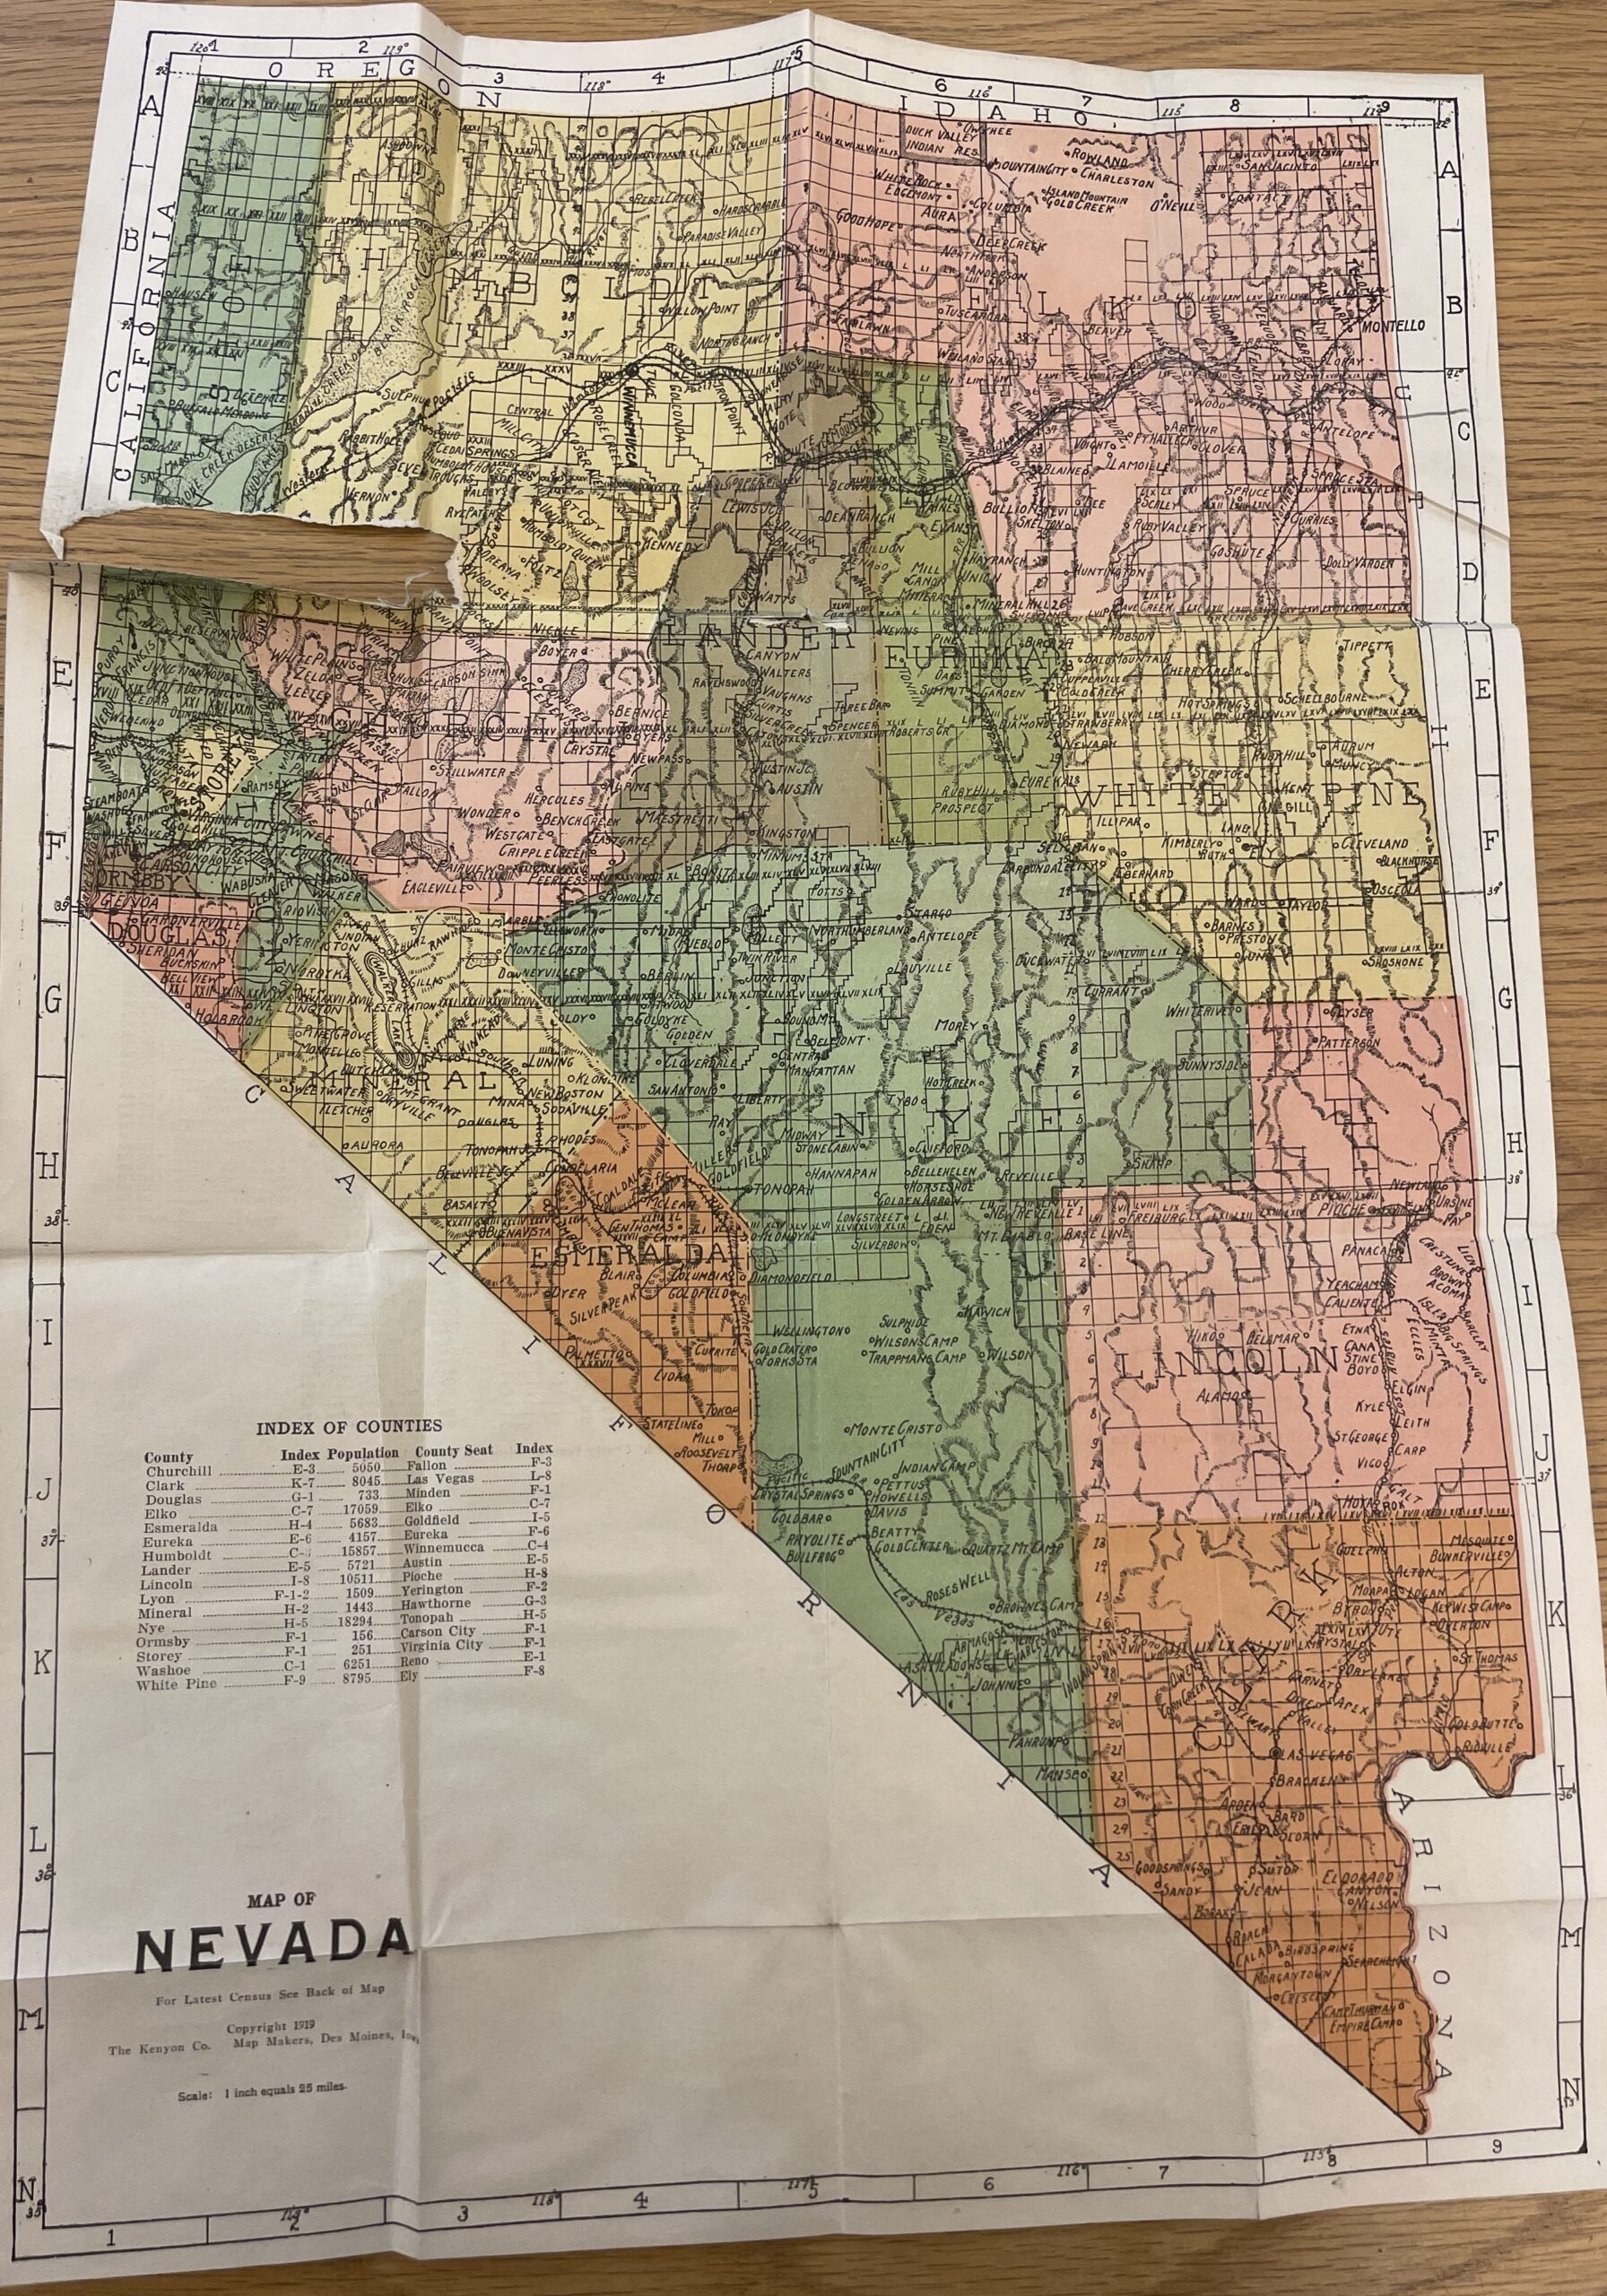 1919 Kenyon’s Pocket Map of Nevada - when fully open